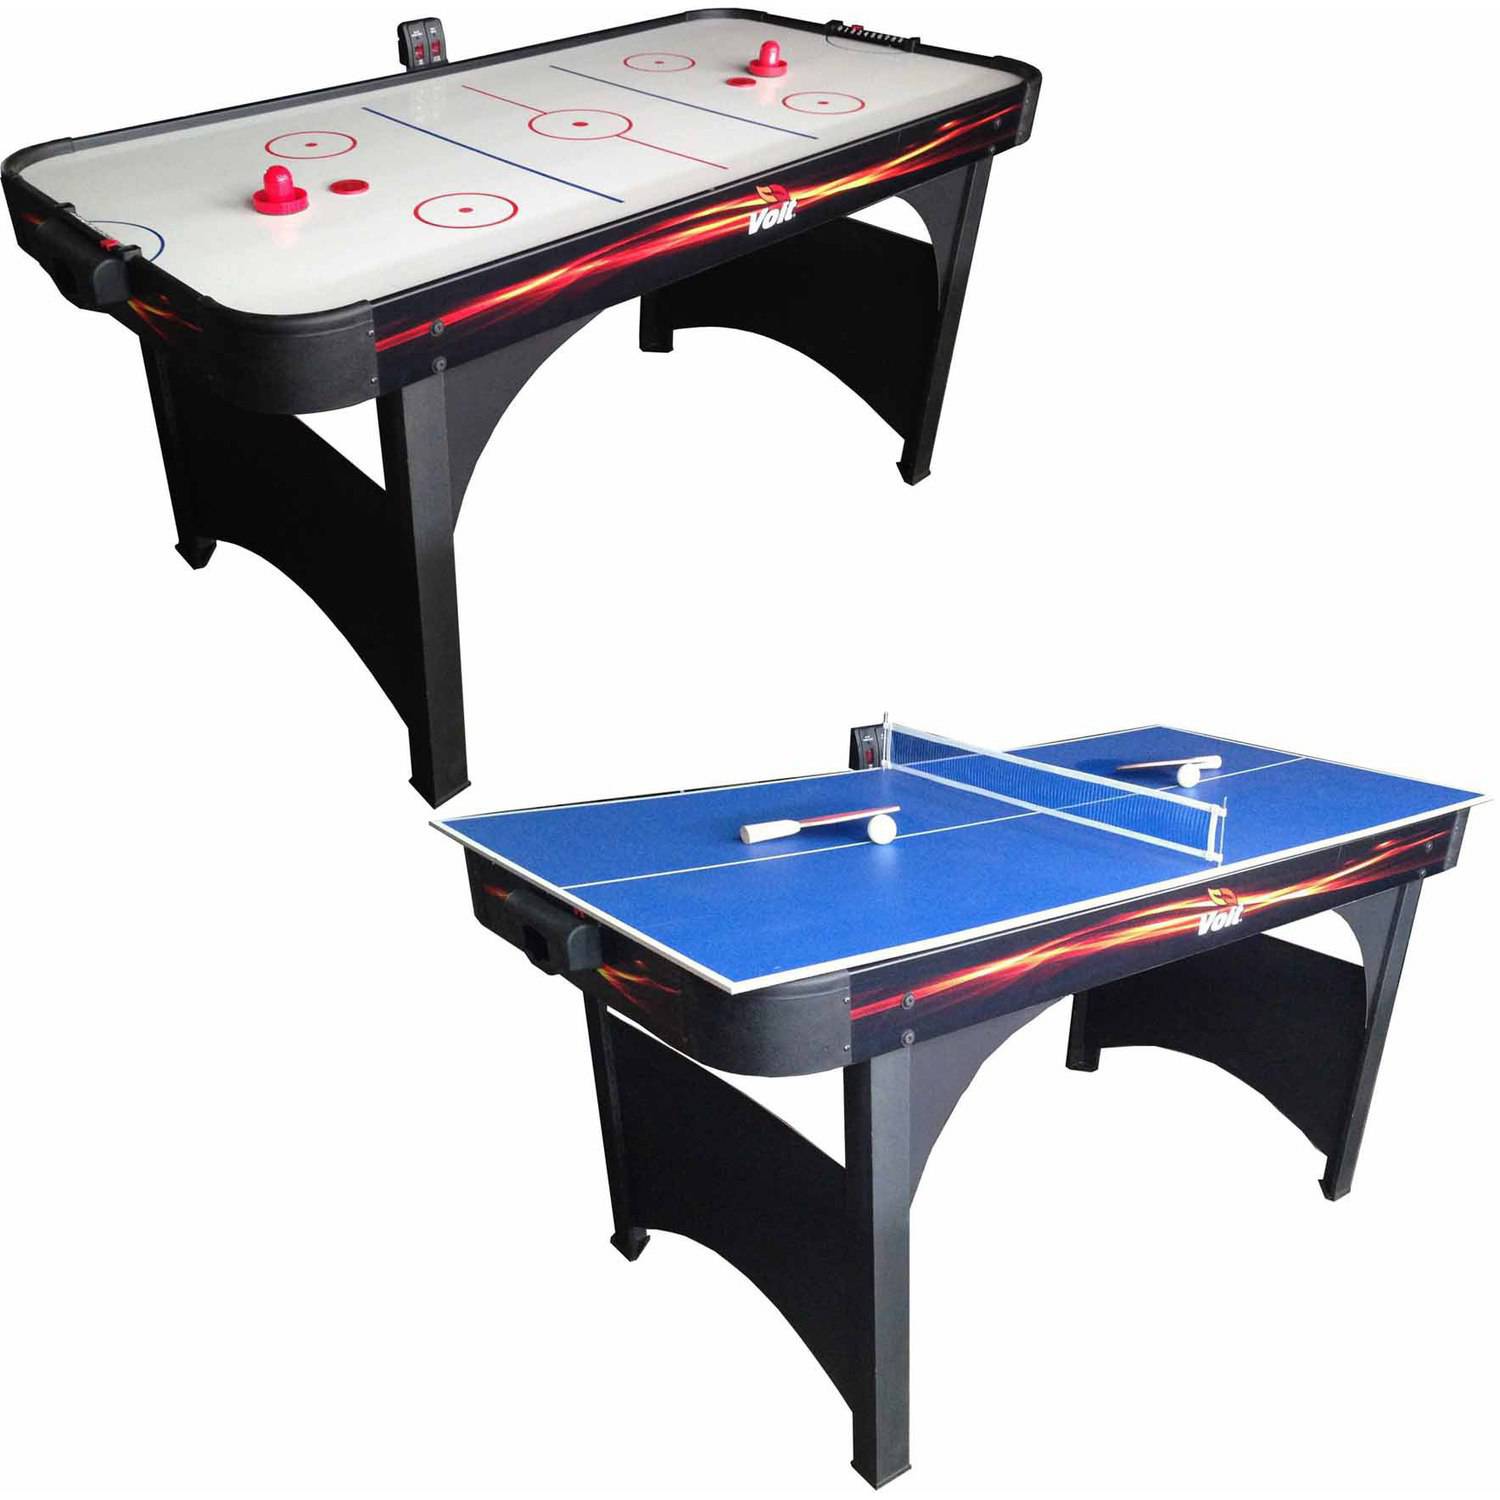 Voit Playmaker 60" Air Hockey Table with Table Tennis - image 1 of 6